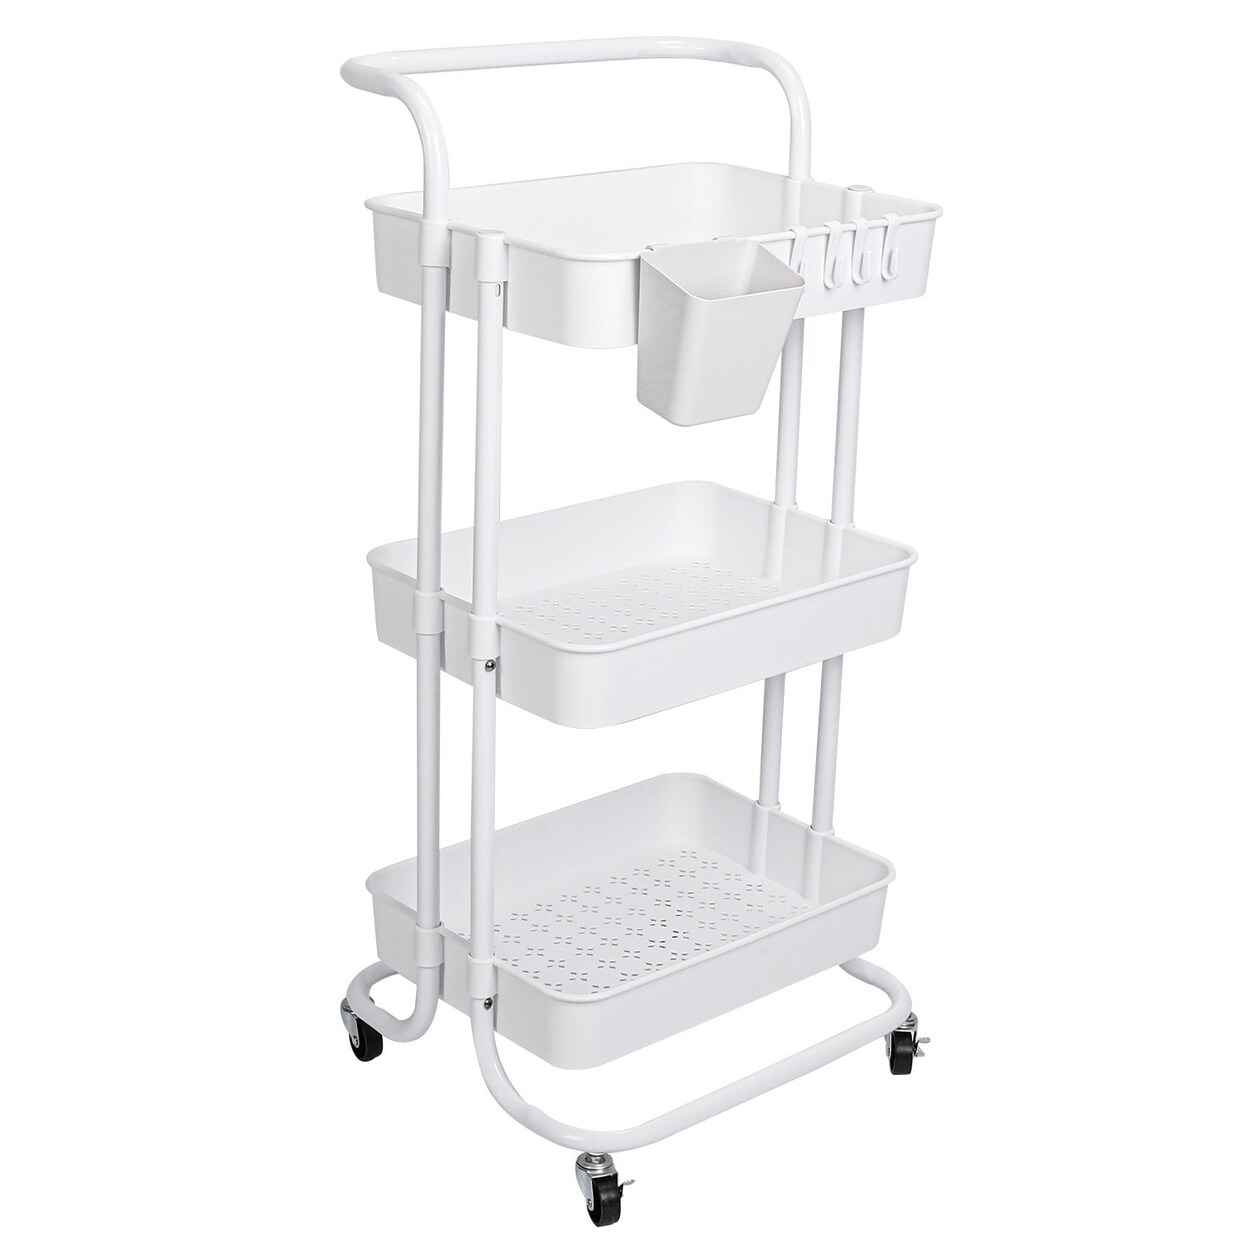 SKUSHOPS 3 Tier Rolling Utility Cart Movable Storage Organizer with Mesh Baskets Lockable Wheels 360 Degree Rotatable Hanging Box